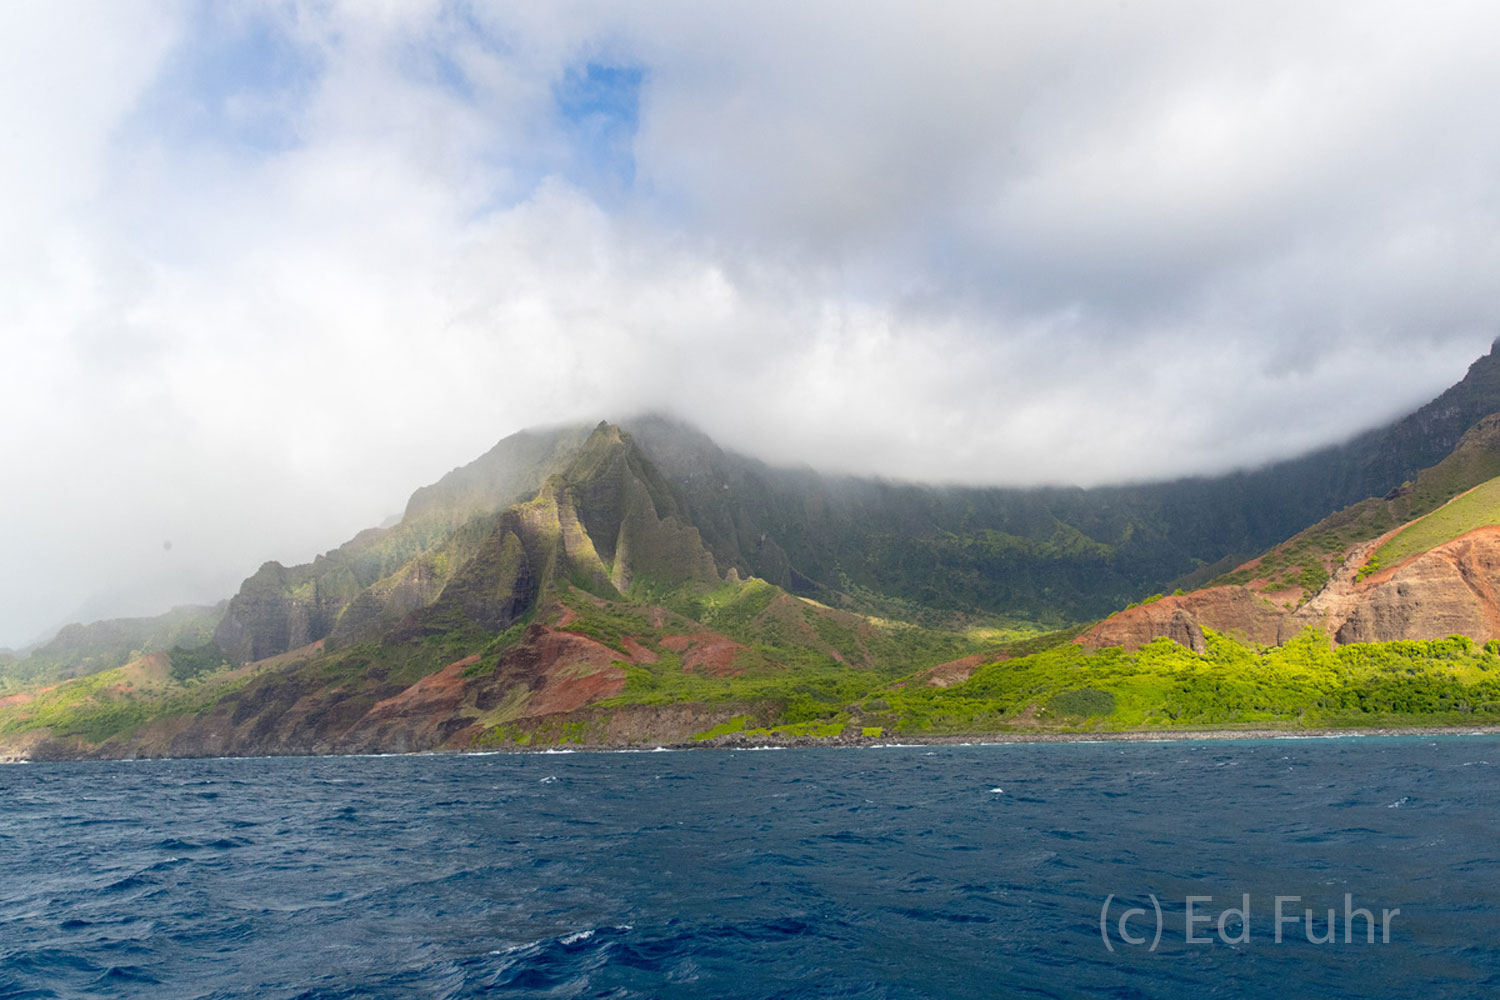 One of my favorite images of Kauai, this view of the coast captures its moodiness, color and rugged beauty.